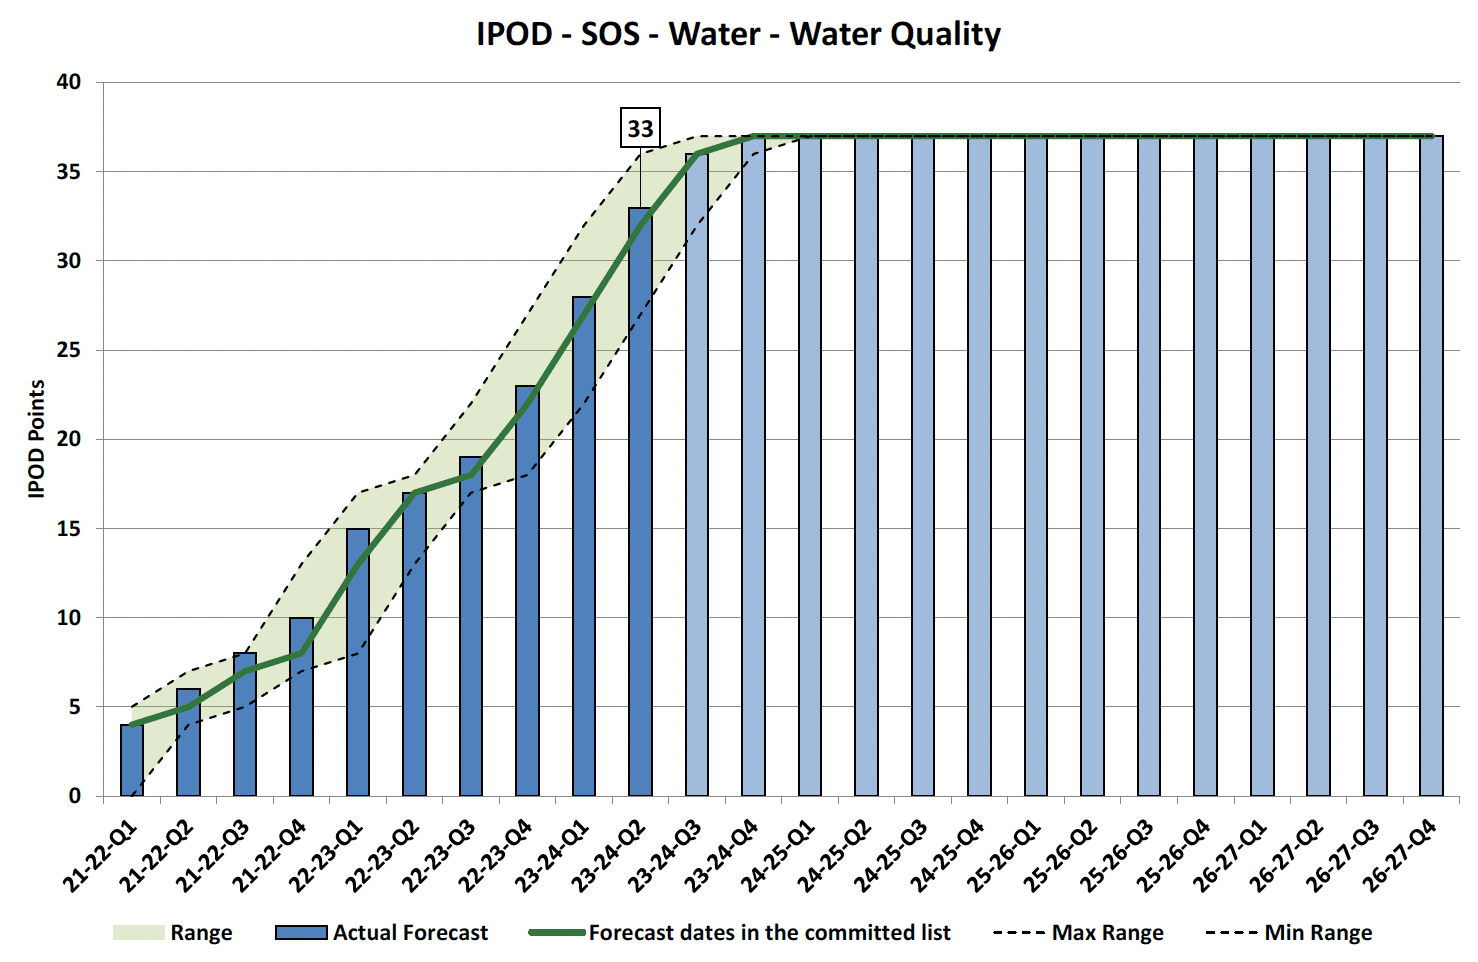 Chart showing IPOD points achieved or forecast for Start on Site milestone against target range for Water Quality Projects in Water Portfolio